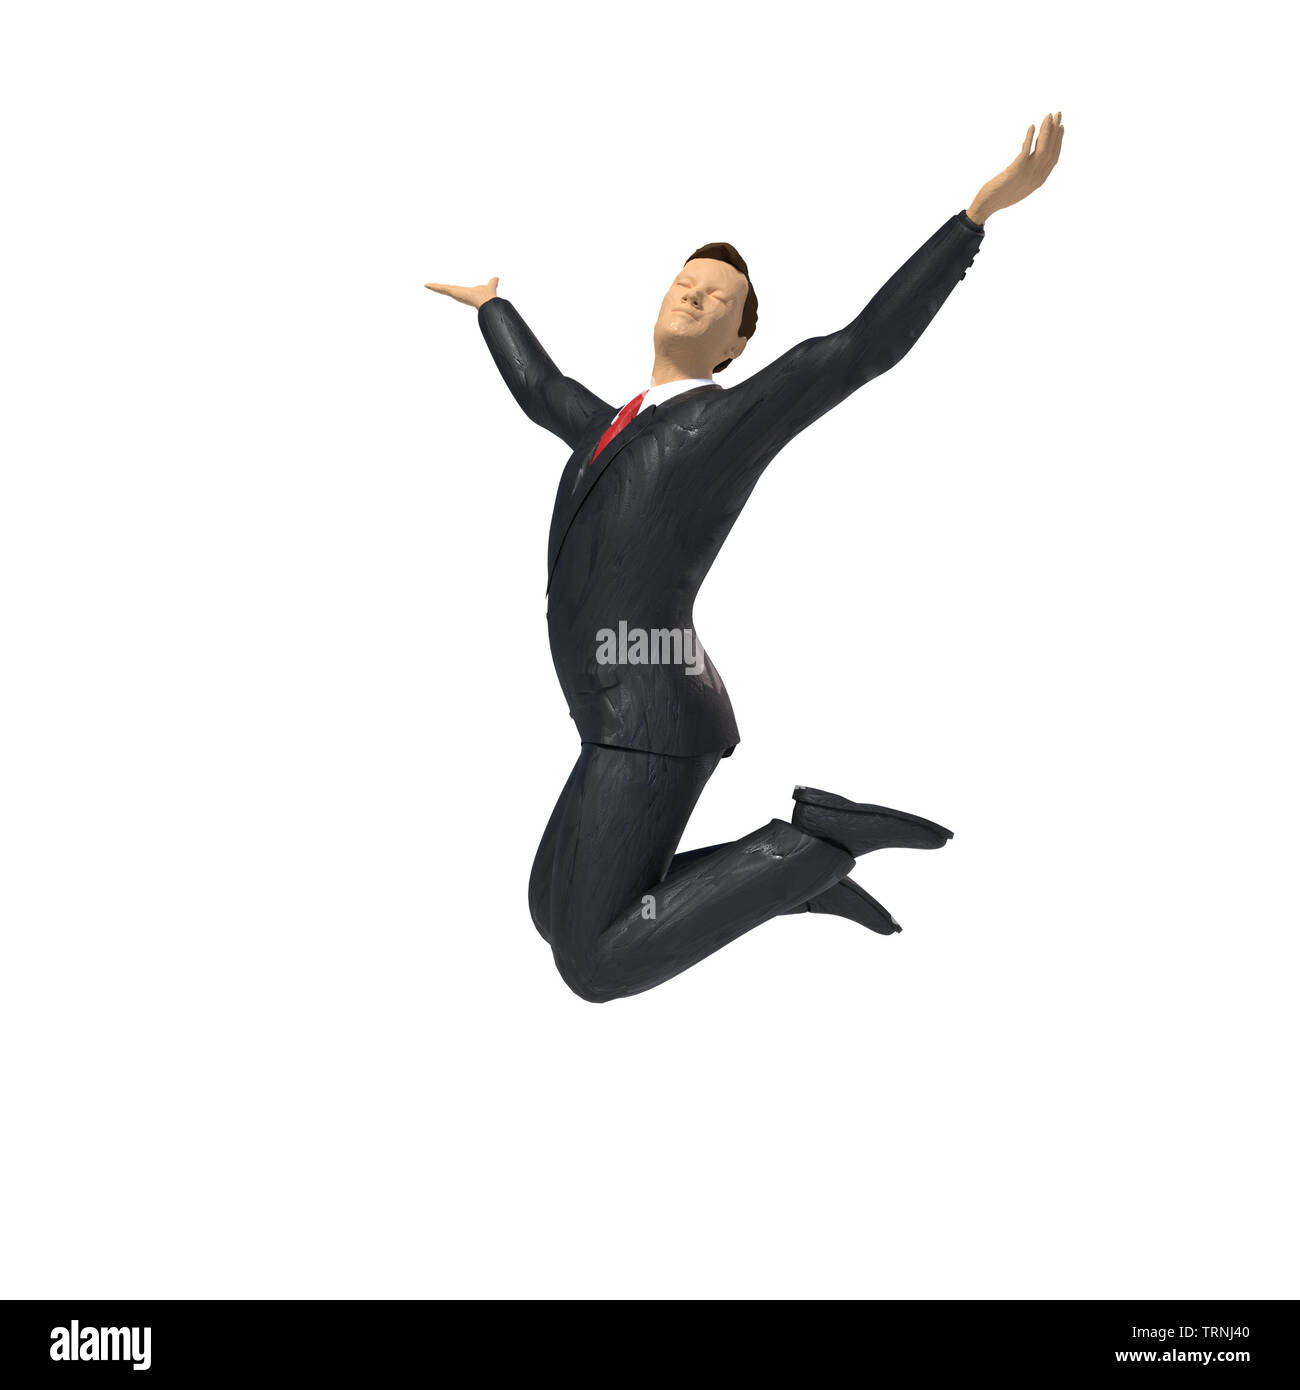 toy miniature businessman figurine is jumping for joy and happiness, concept isolated on white background Stock Photo